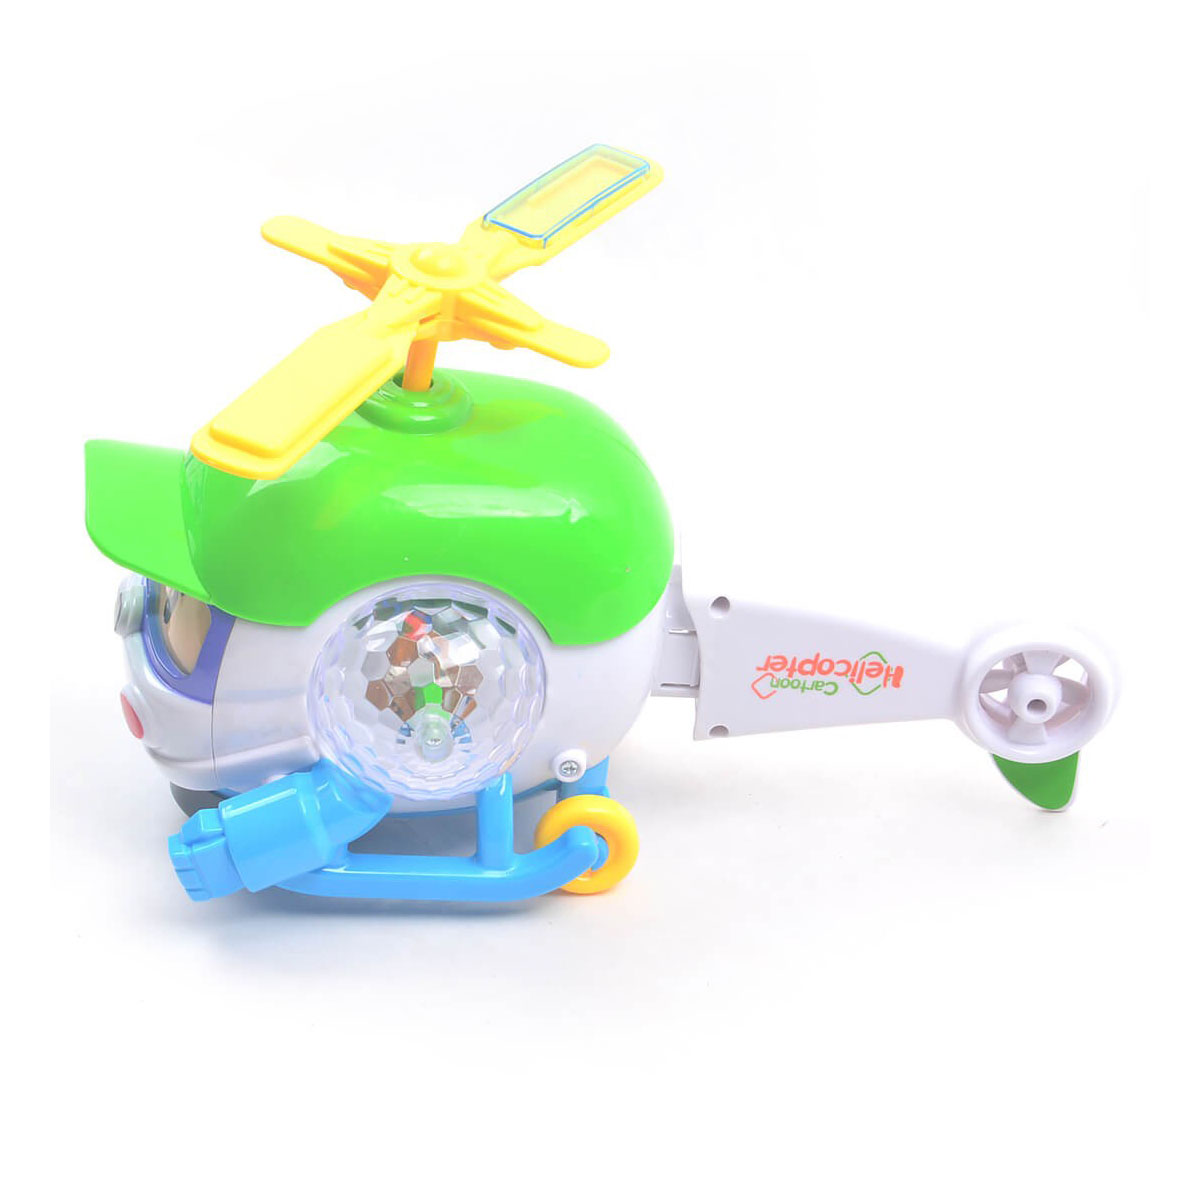 Cartoon Helicopter With Lighting & Musical Sound